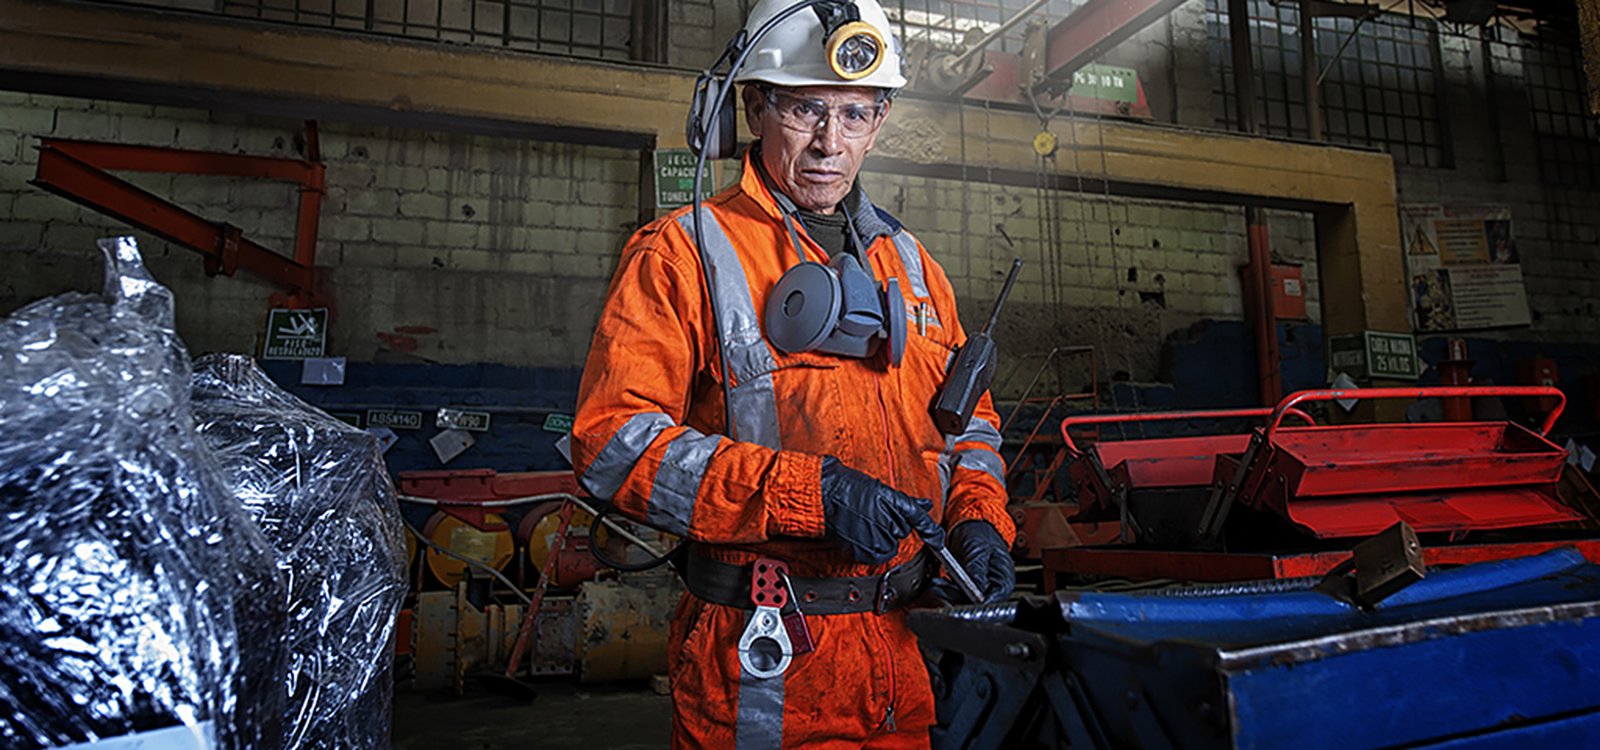 Together with Milpo, technician Gregorio Hernández Cure and his Sandvik colleagues strive to maintain El Porvenir’s reputation as one of the safest mines in Peru.